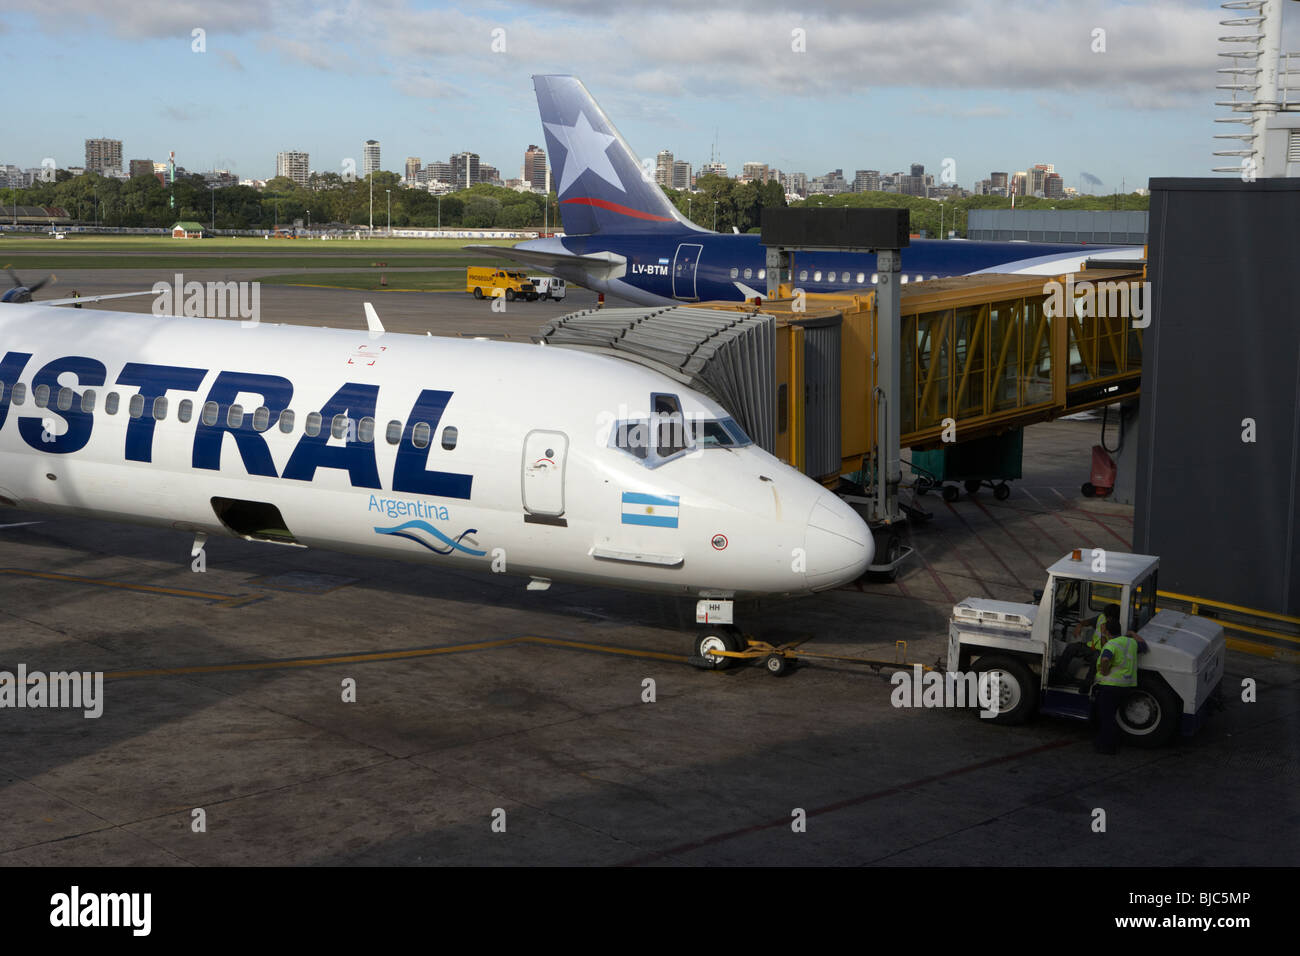 austral lineas areas McDonnell Douglas MD-81 LV-BHH aircraft on stand at aeroparque jorge newbery aep airport buenos aires Stock Photo